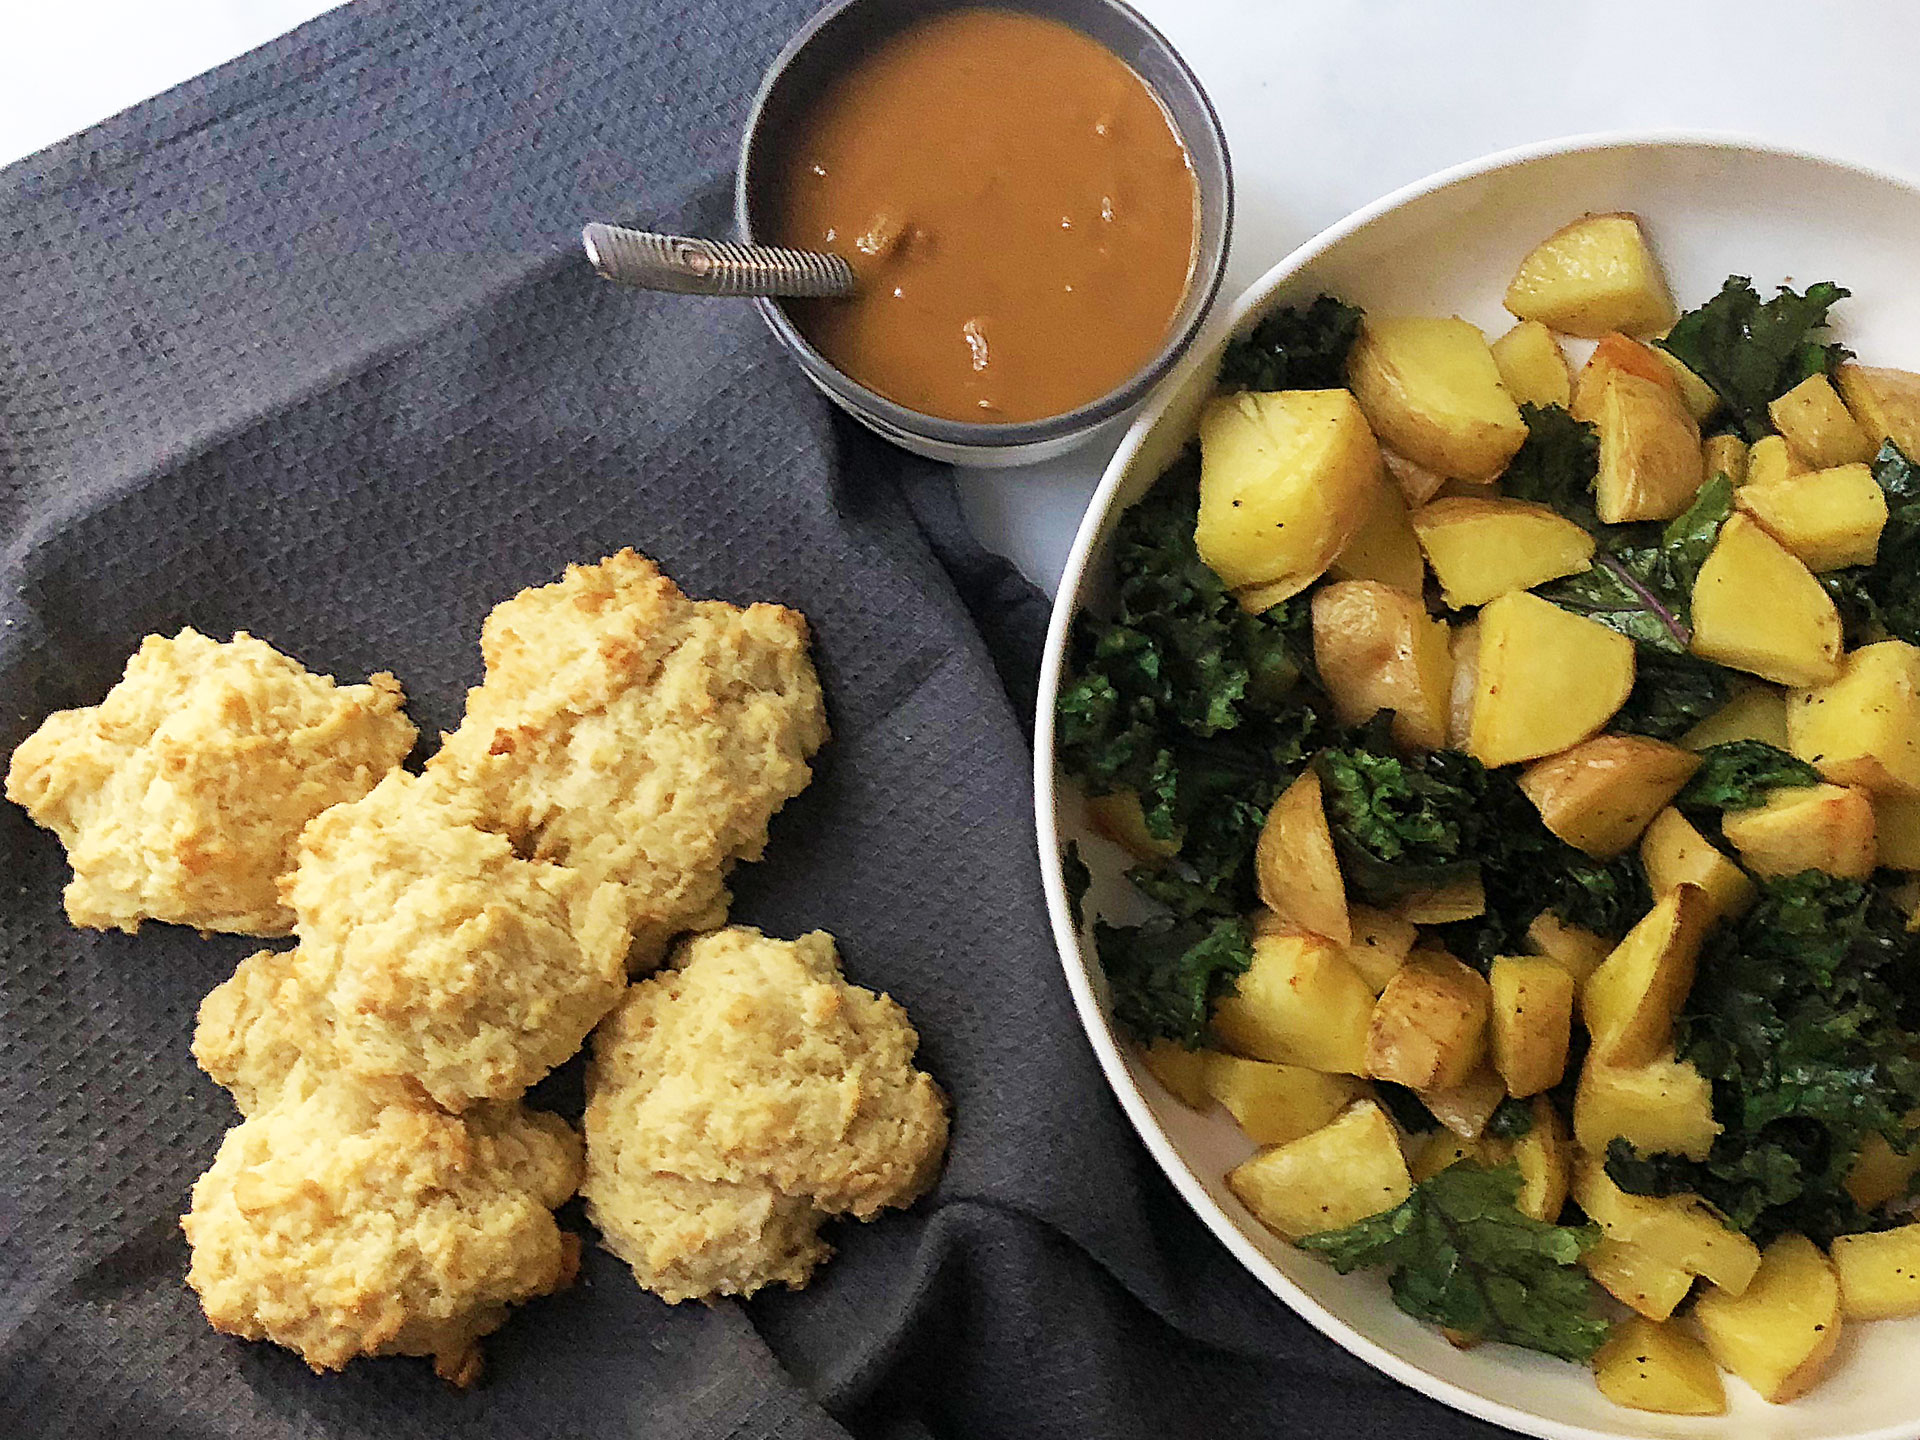 Roasted Potatoes with Kale, Gravy and Biscuits